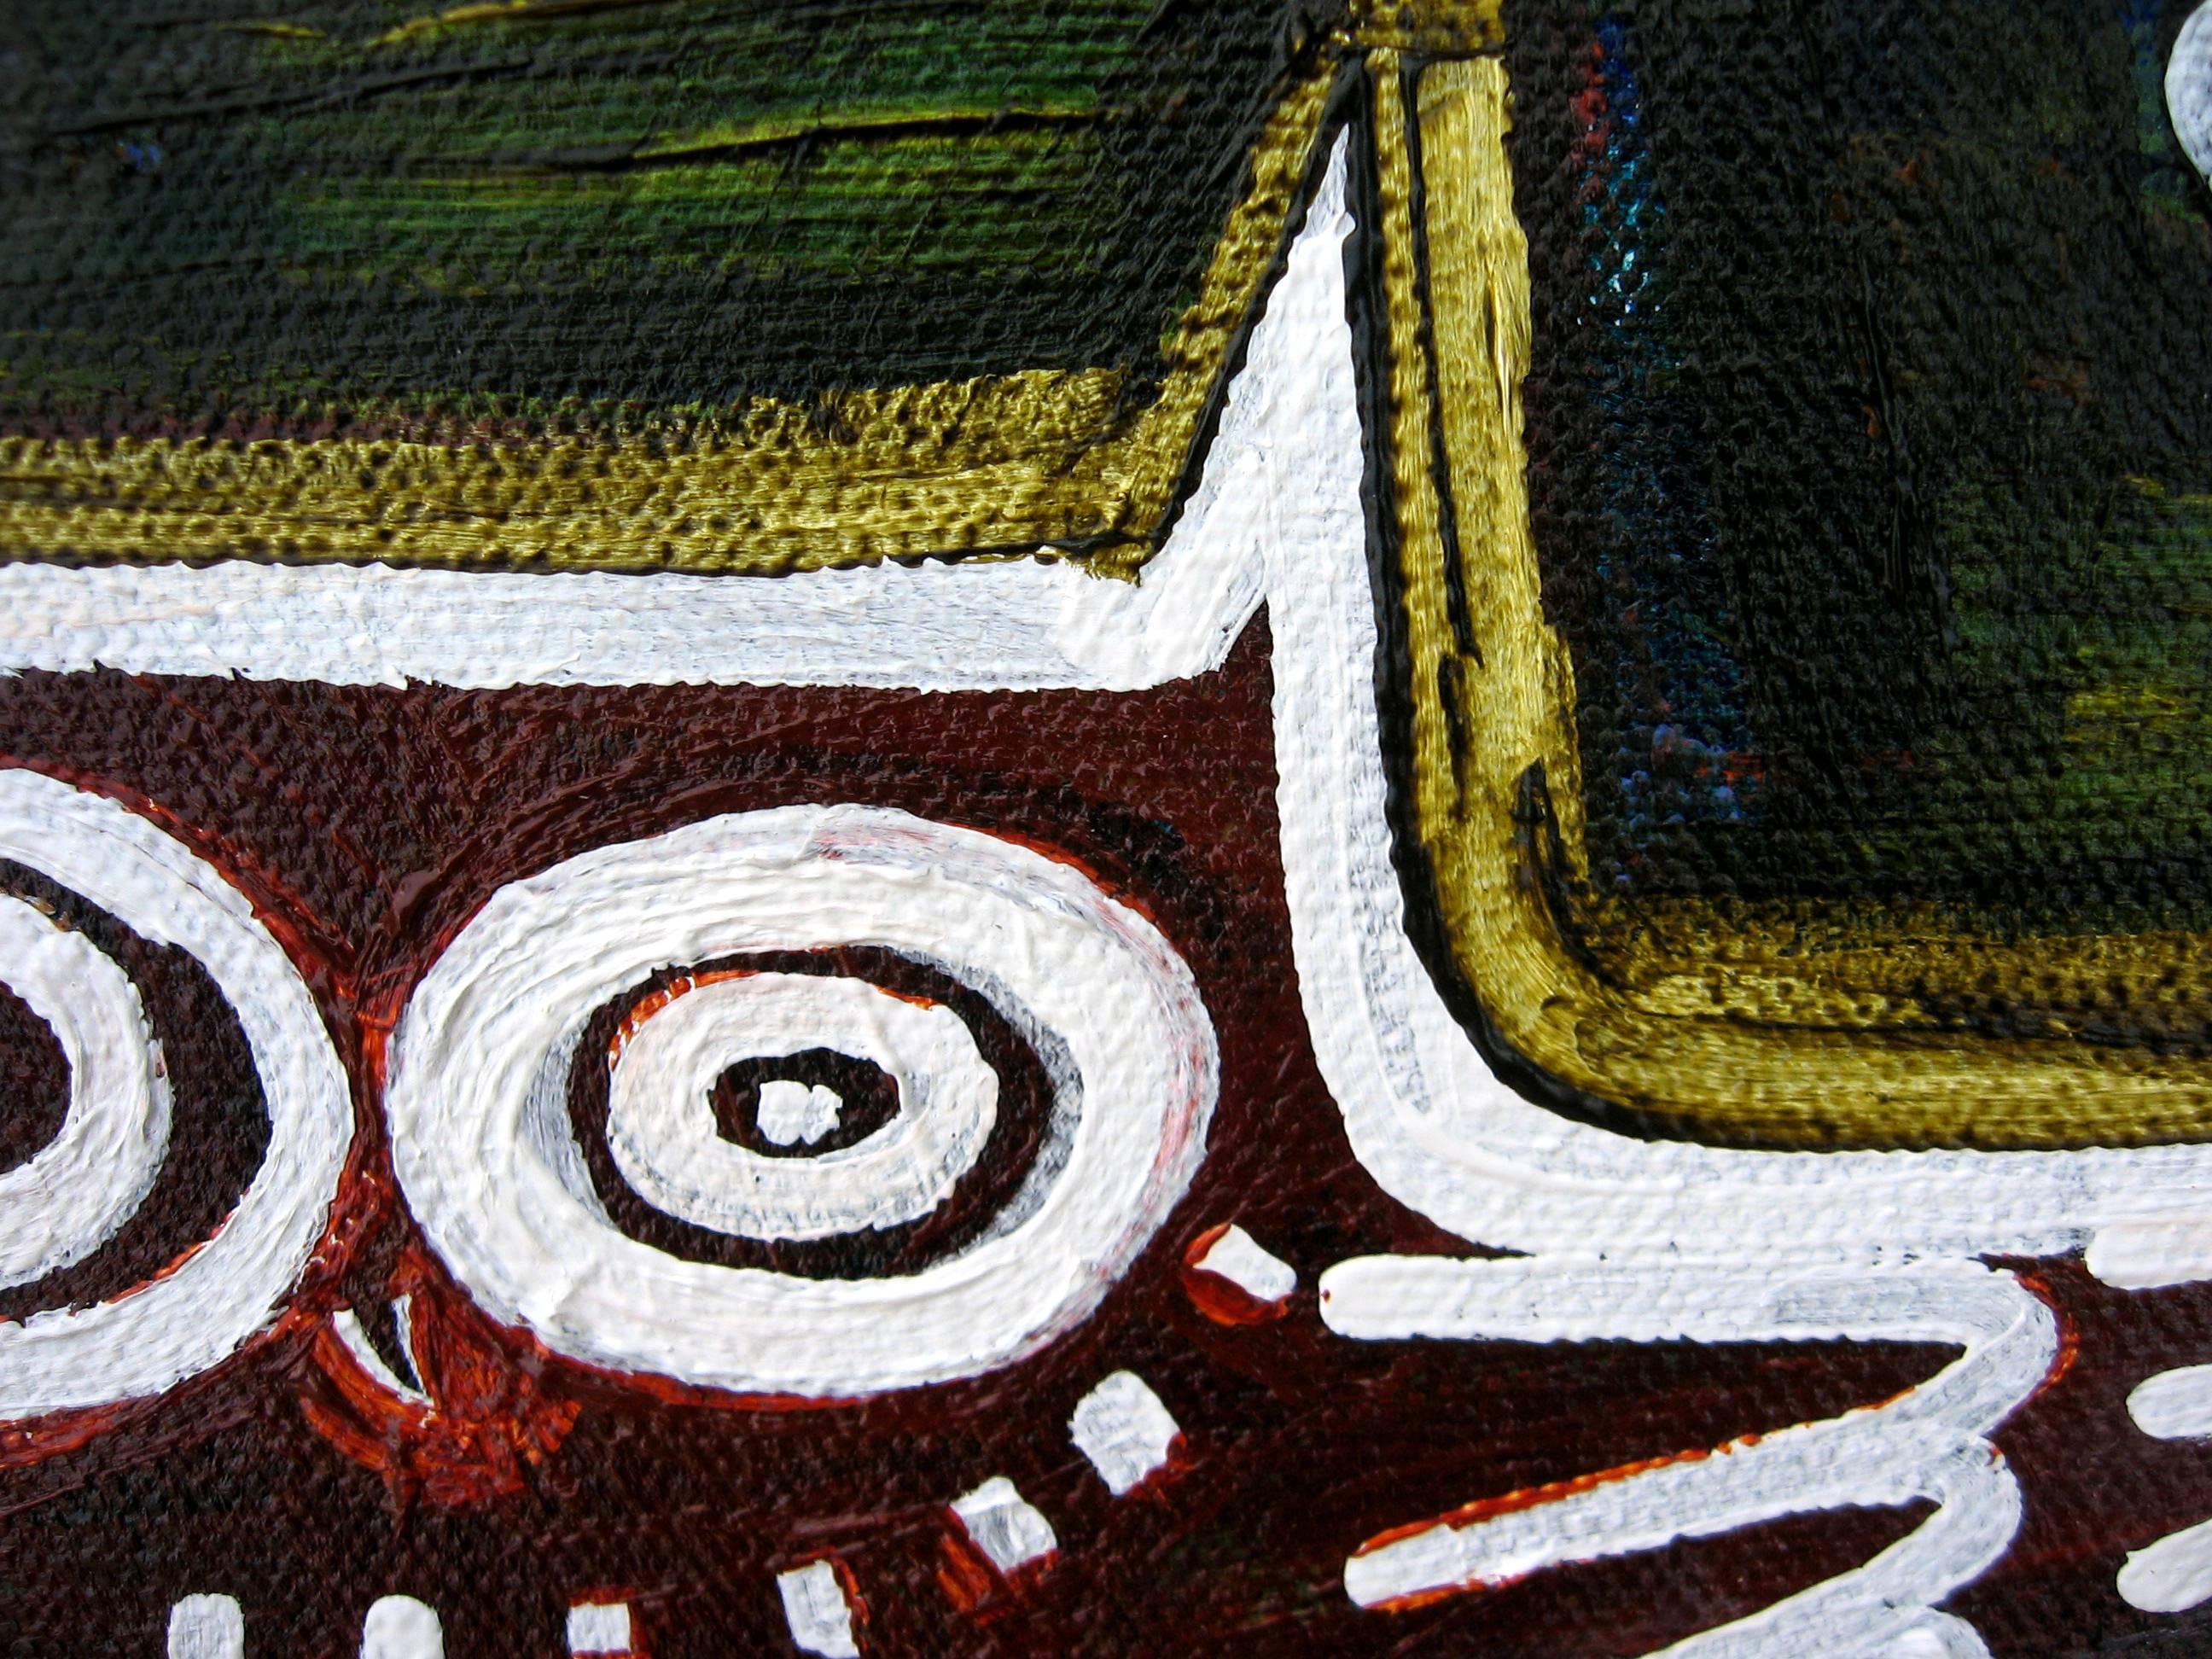 <p>Artist Comments<br>This is the third painting I created inspired by the Screech Owl that spends time in the Maple Tree in my front yard. It is my second painting of this owl with a C-moon overhead. The painting is on a gallery wrapped canvas with